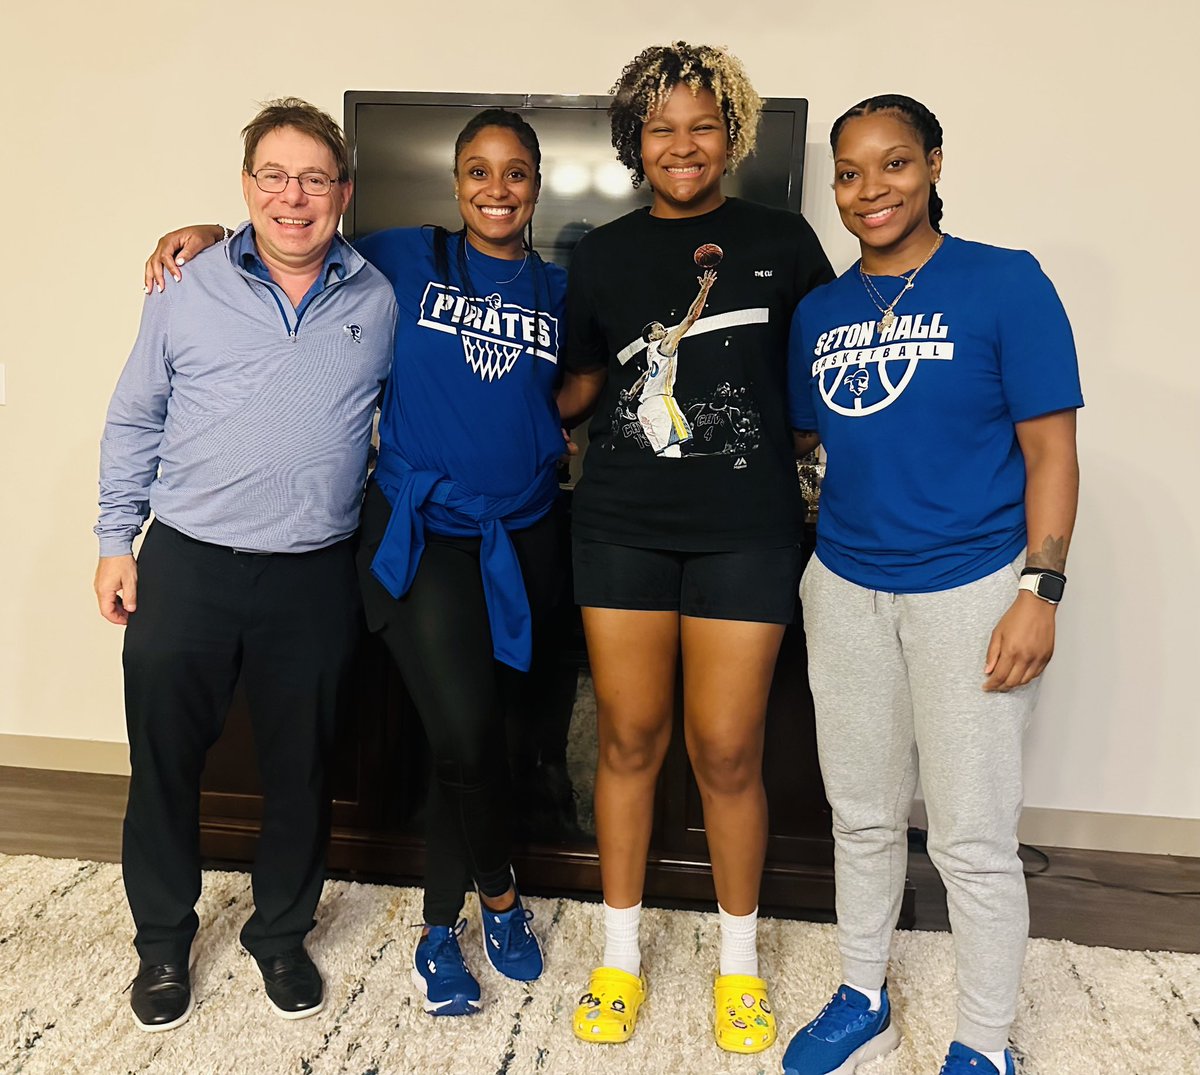 Thank you Seton Hall for the amazing home visit and taking the time to have dinner with me and my family! @TonyBozzella @CoachCC_ @Simmons_CoachDi @SHUWBB